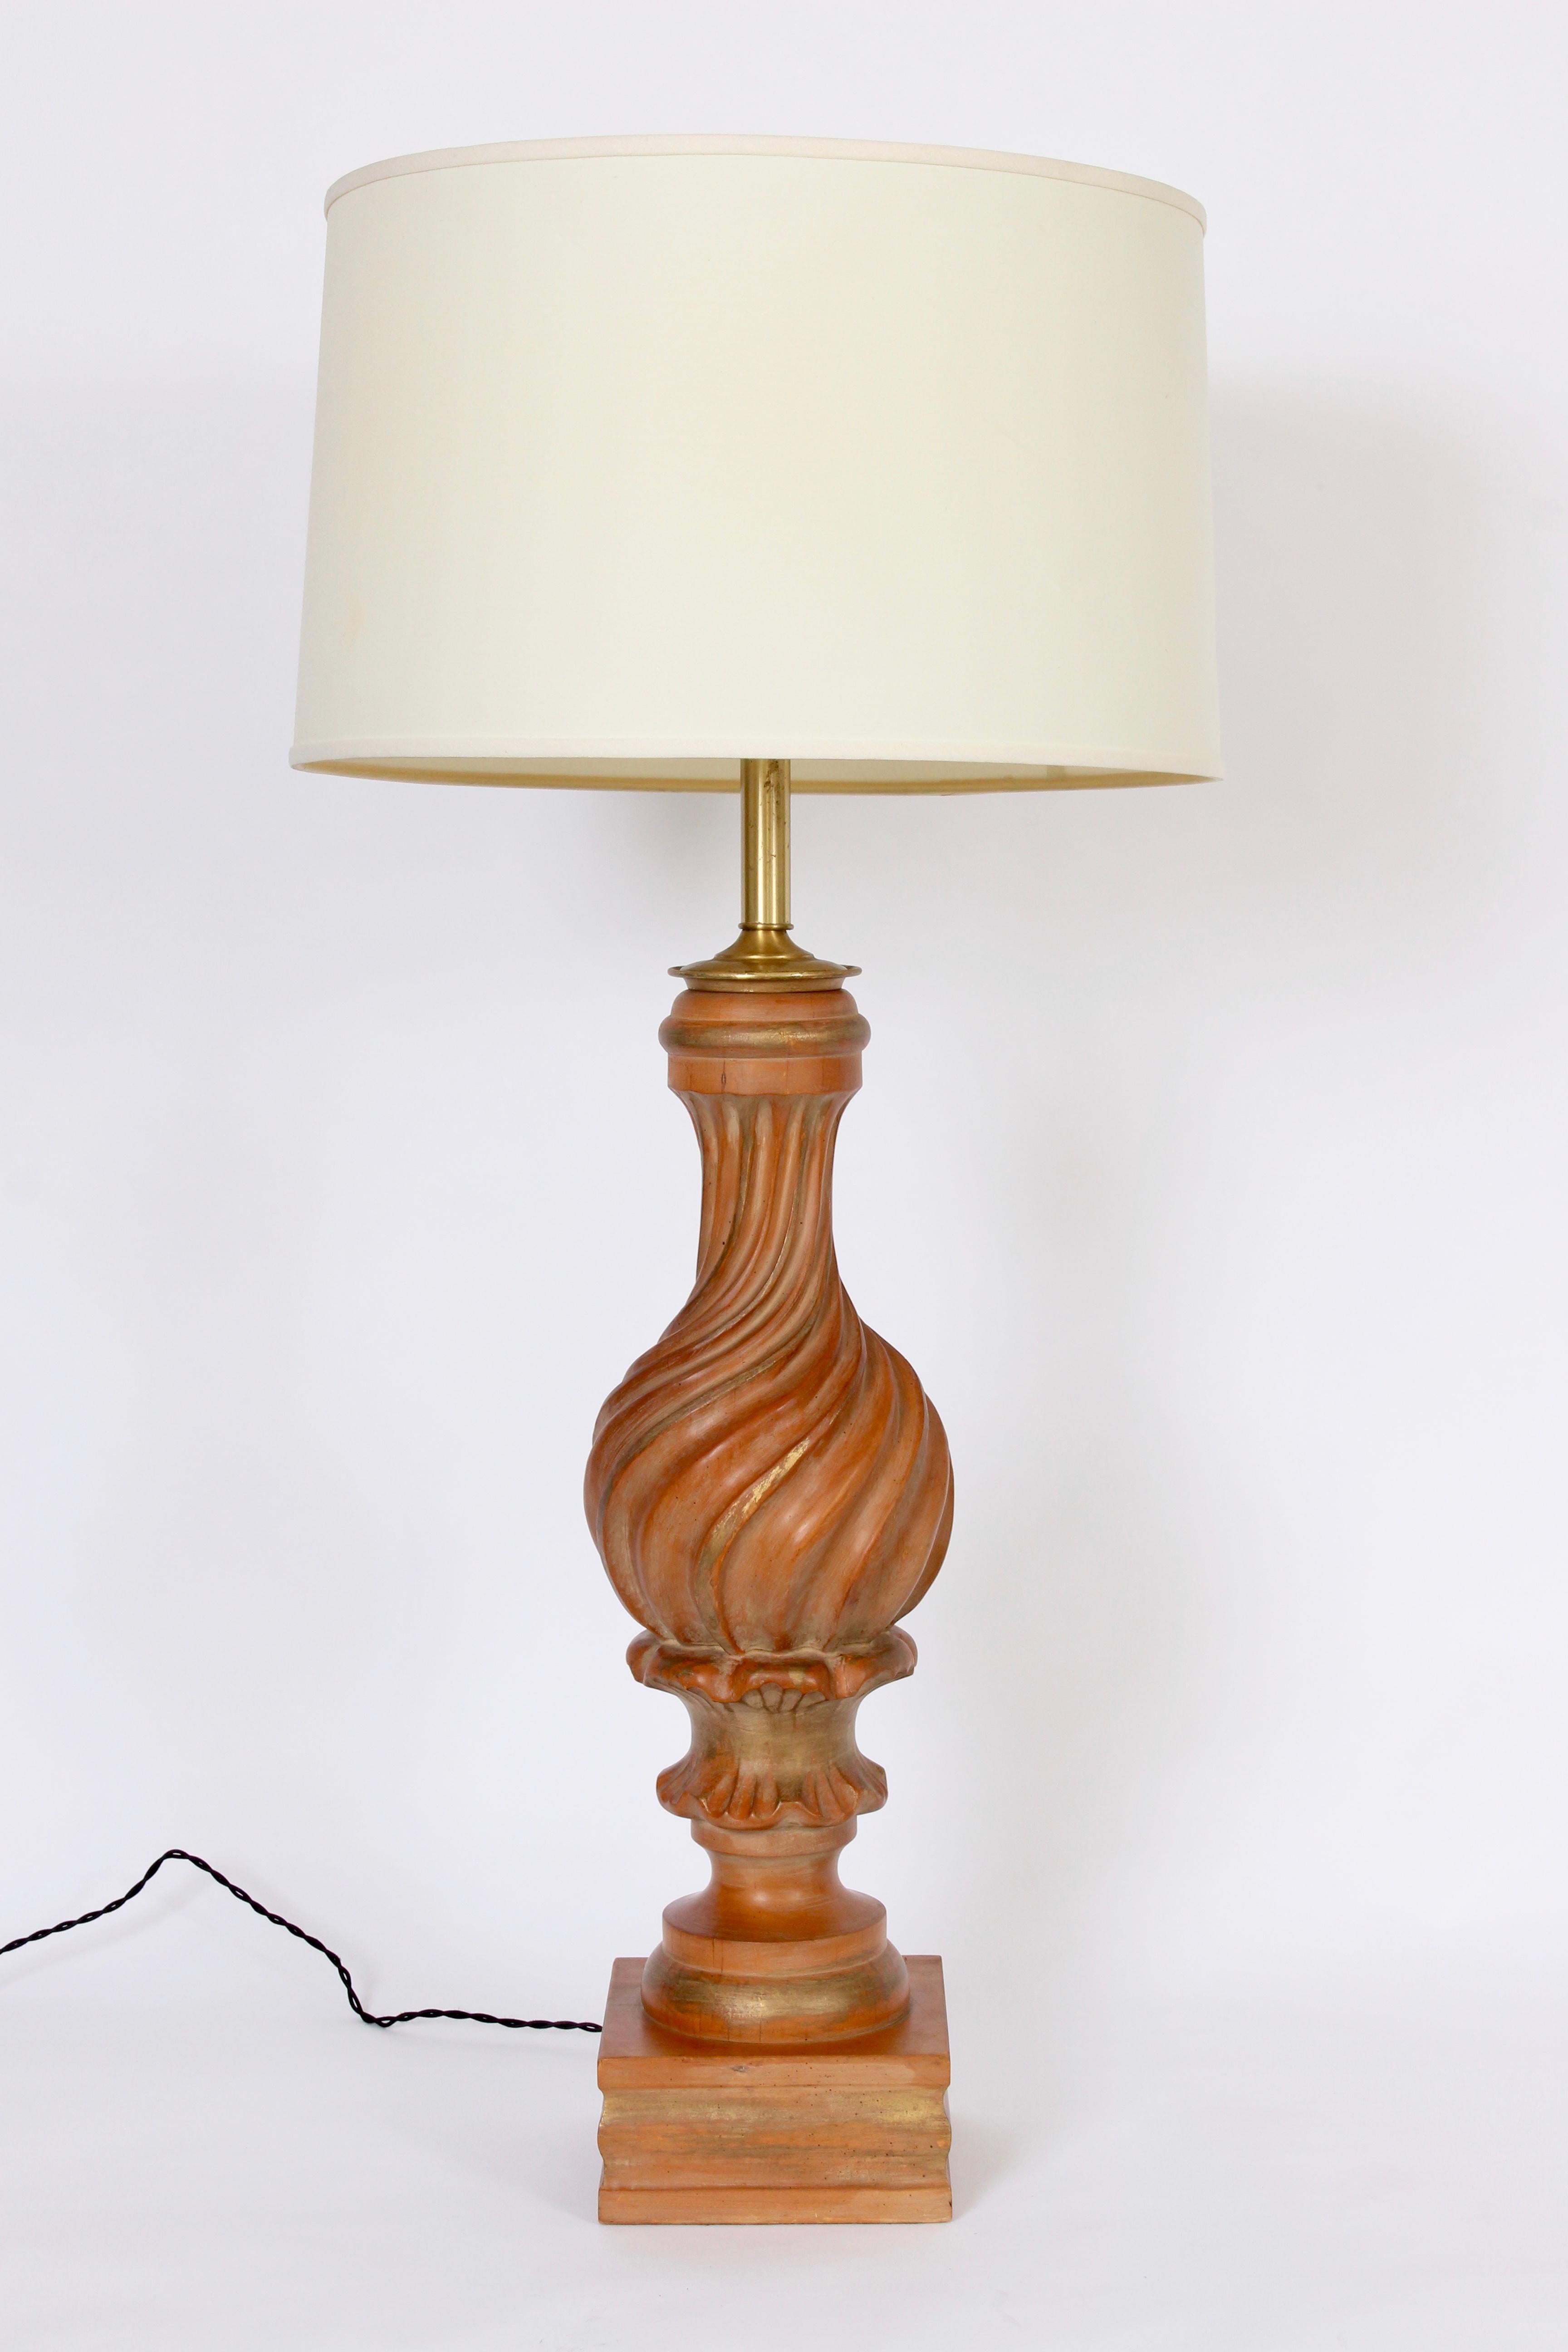 Monumental Marbro Lamp Co. Hand Carved Giltwood Table Lamp For Sale 4